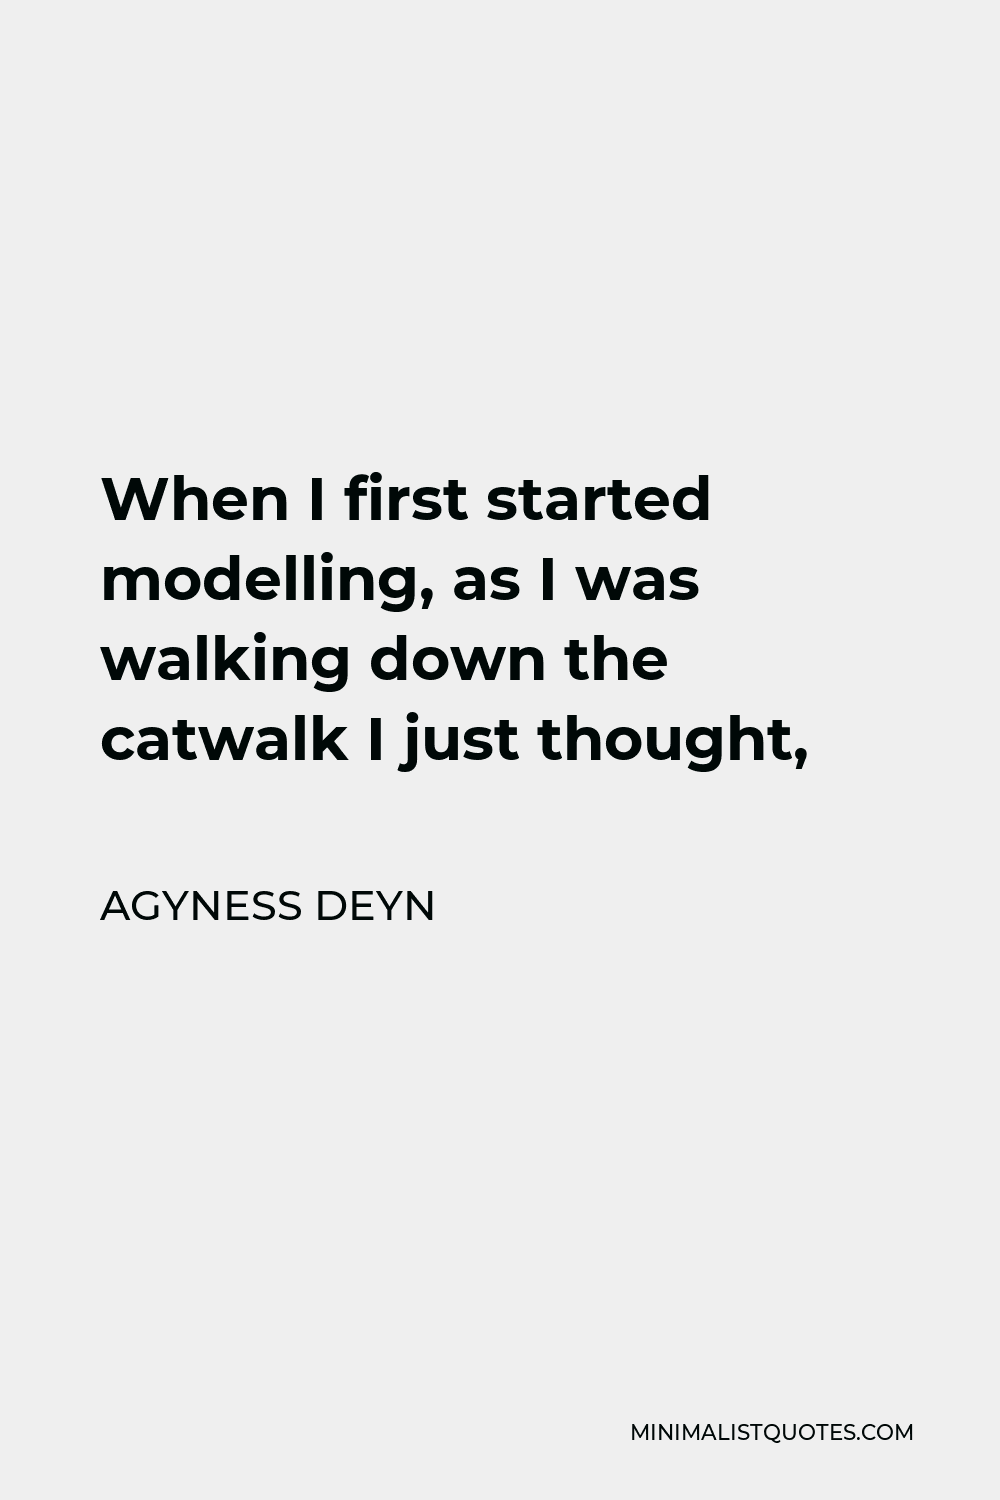 Agyness Deyn Quote - When I first started modelling, as I was walking down the catwalk I just thought,